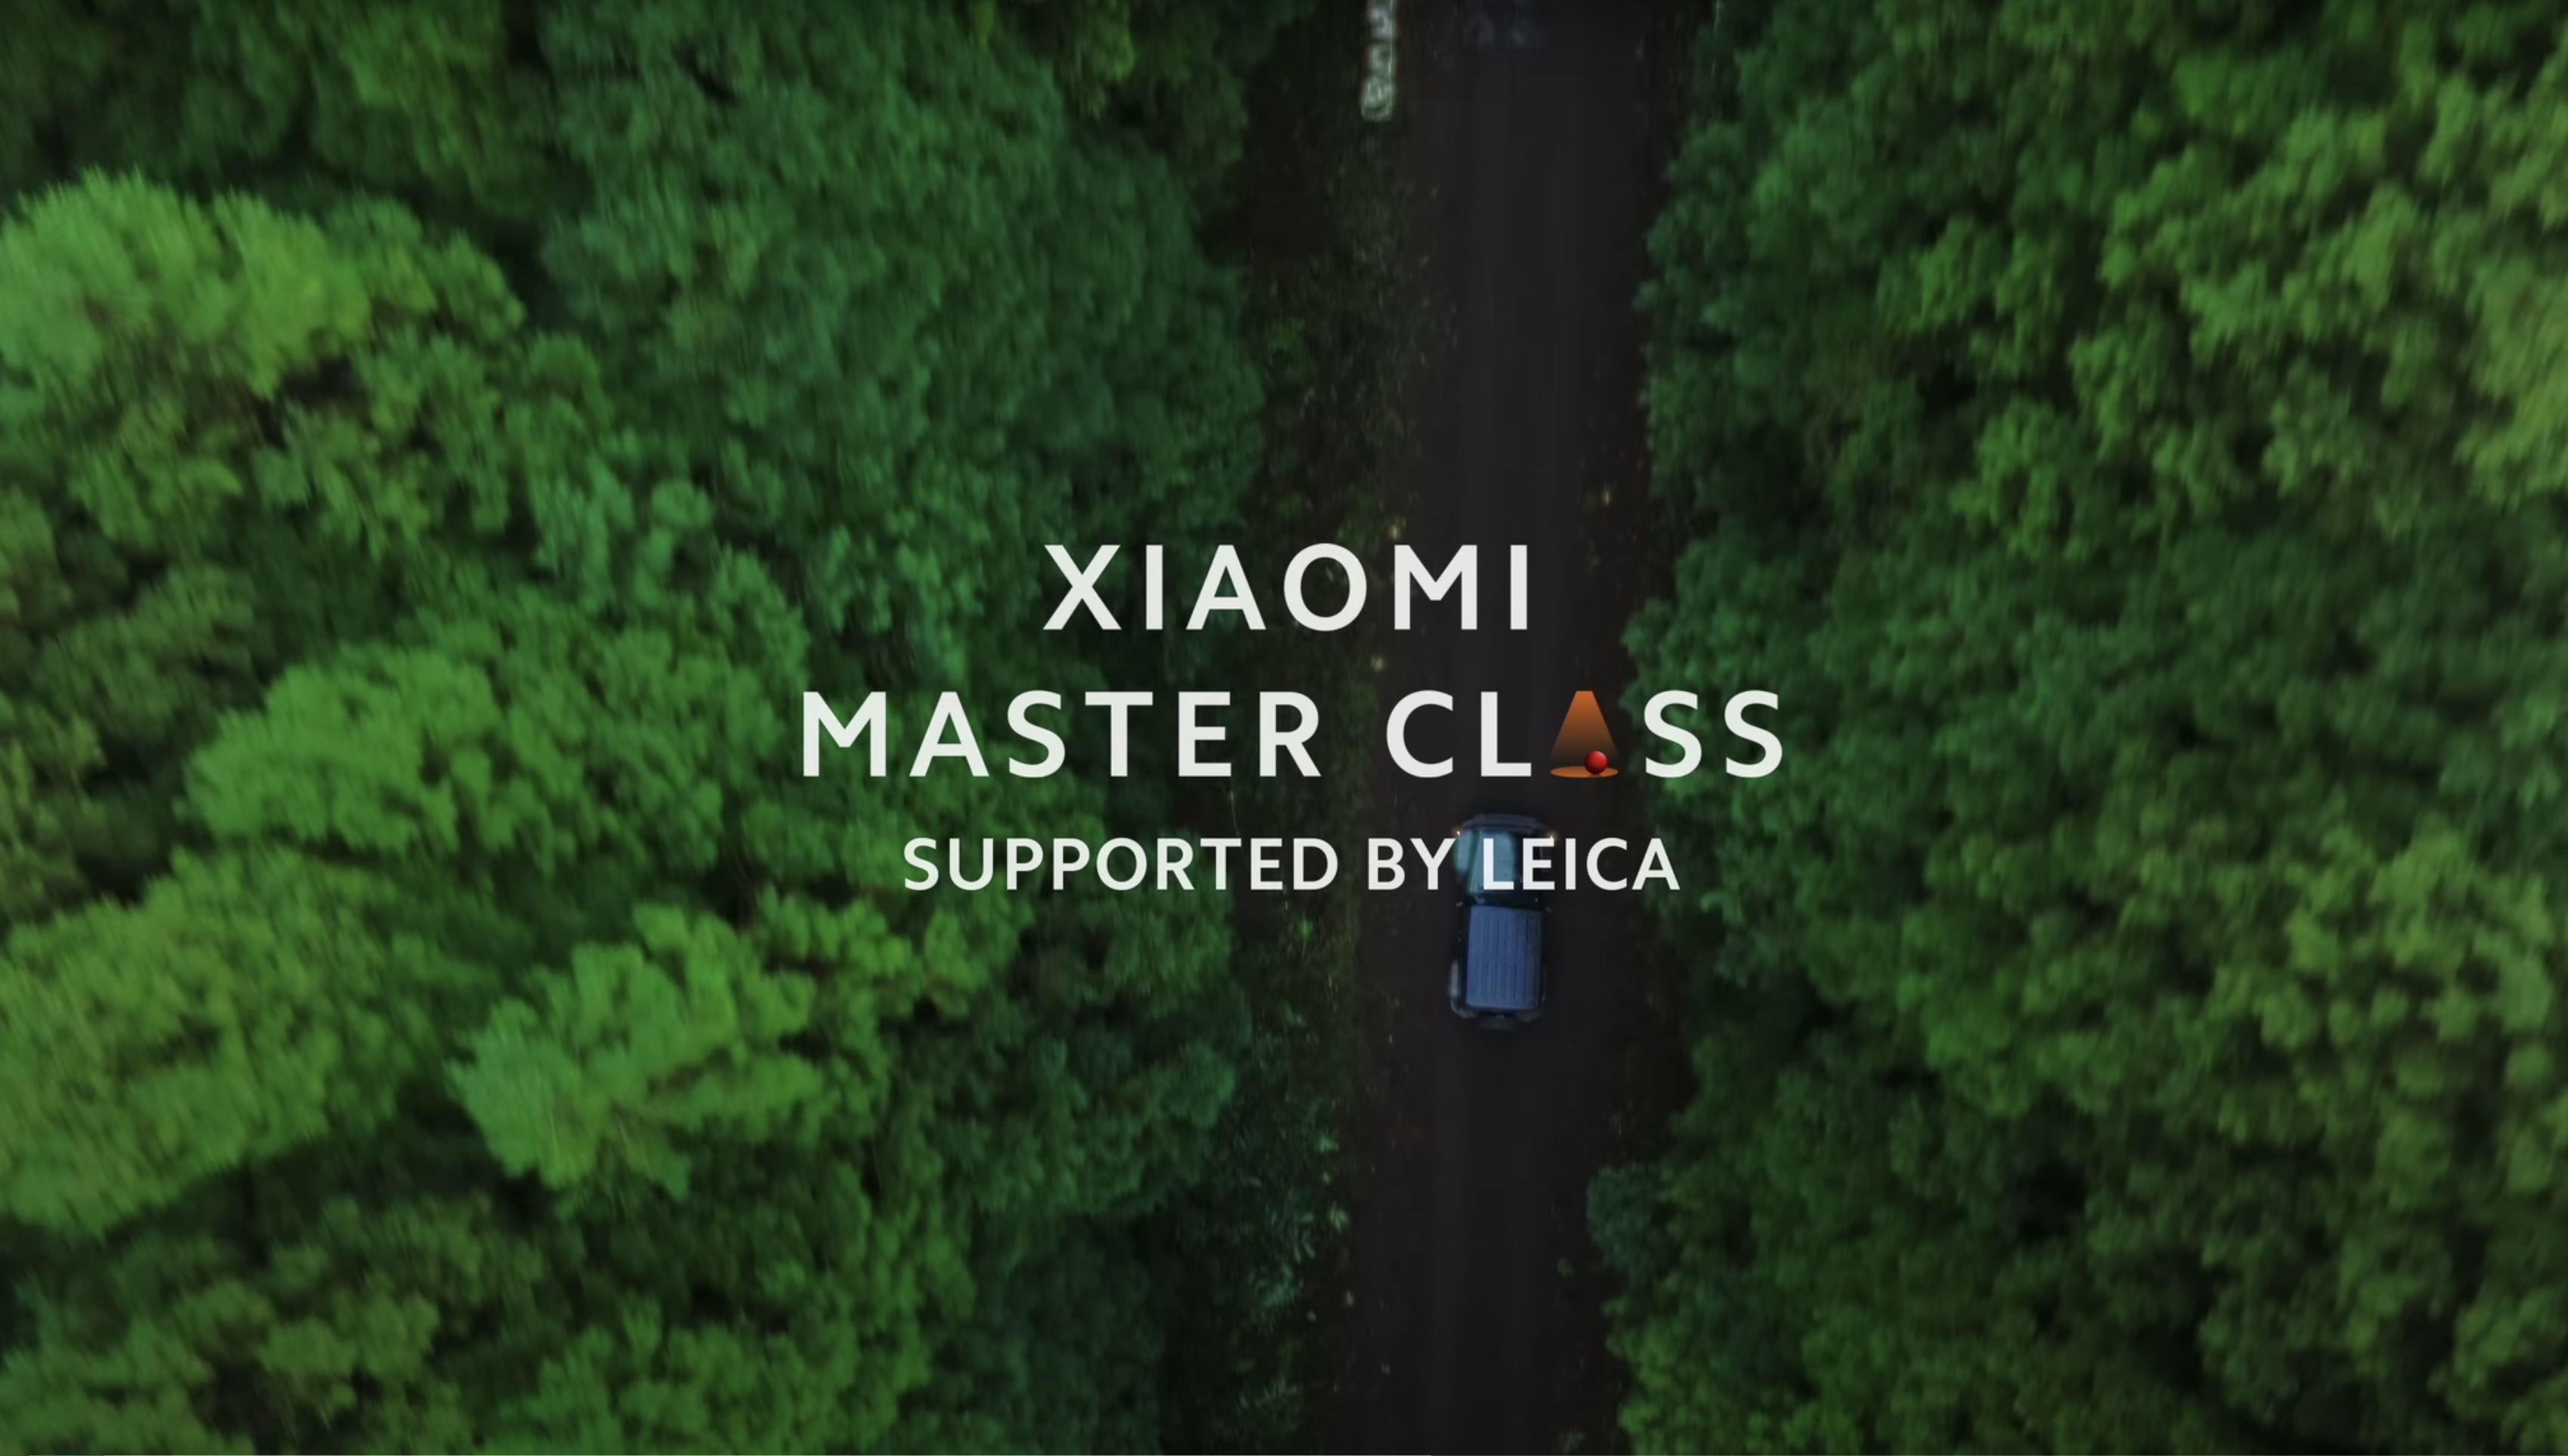 Xiaomi Master Class Supported by Leica - Xiaomi Imagery